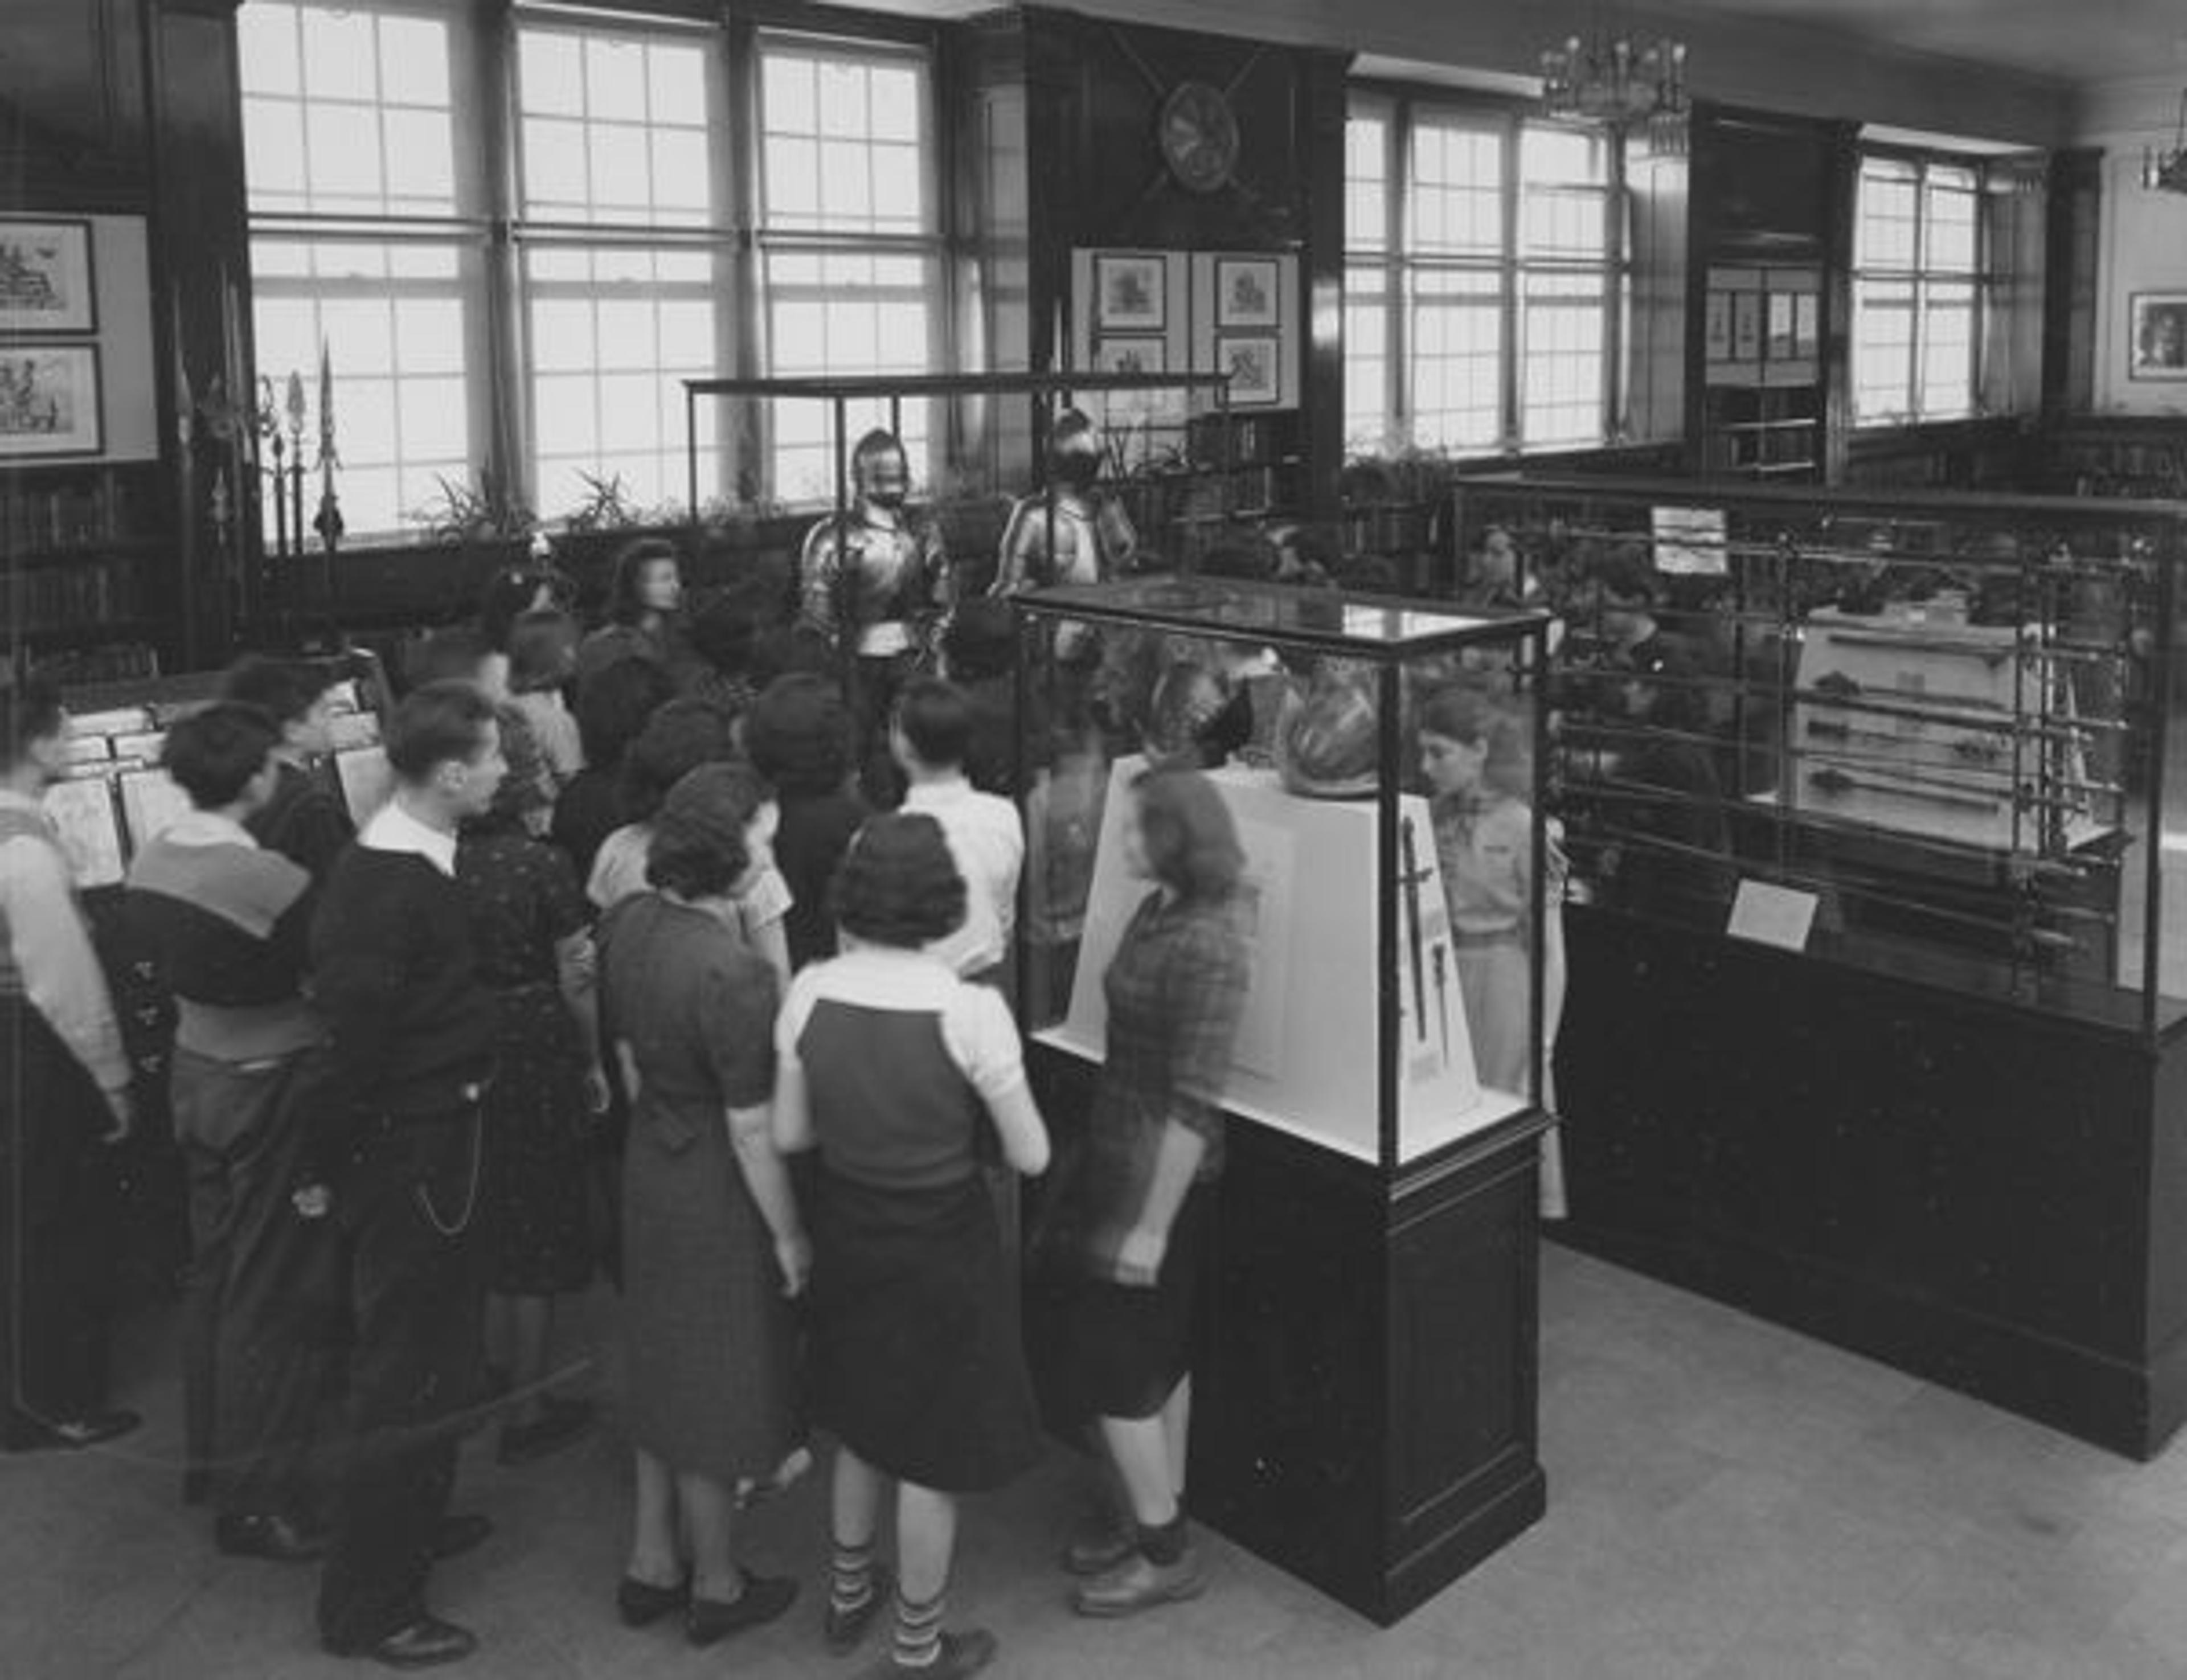 Theodore Roosevelt High School (The Bronx, New York): Arms and Armor (opened February 9, 1939); With teacher and students visiting the exhibition. Photographed February 1939